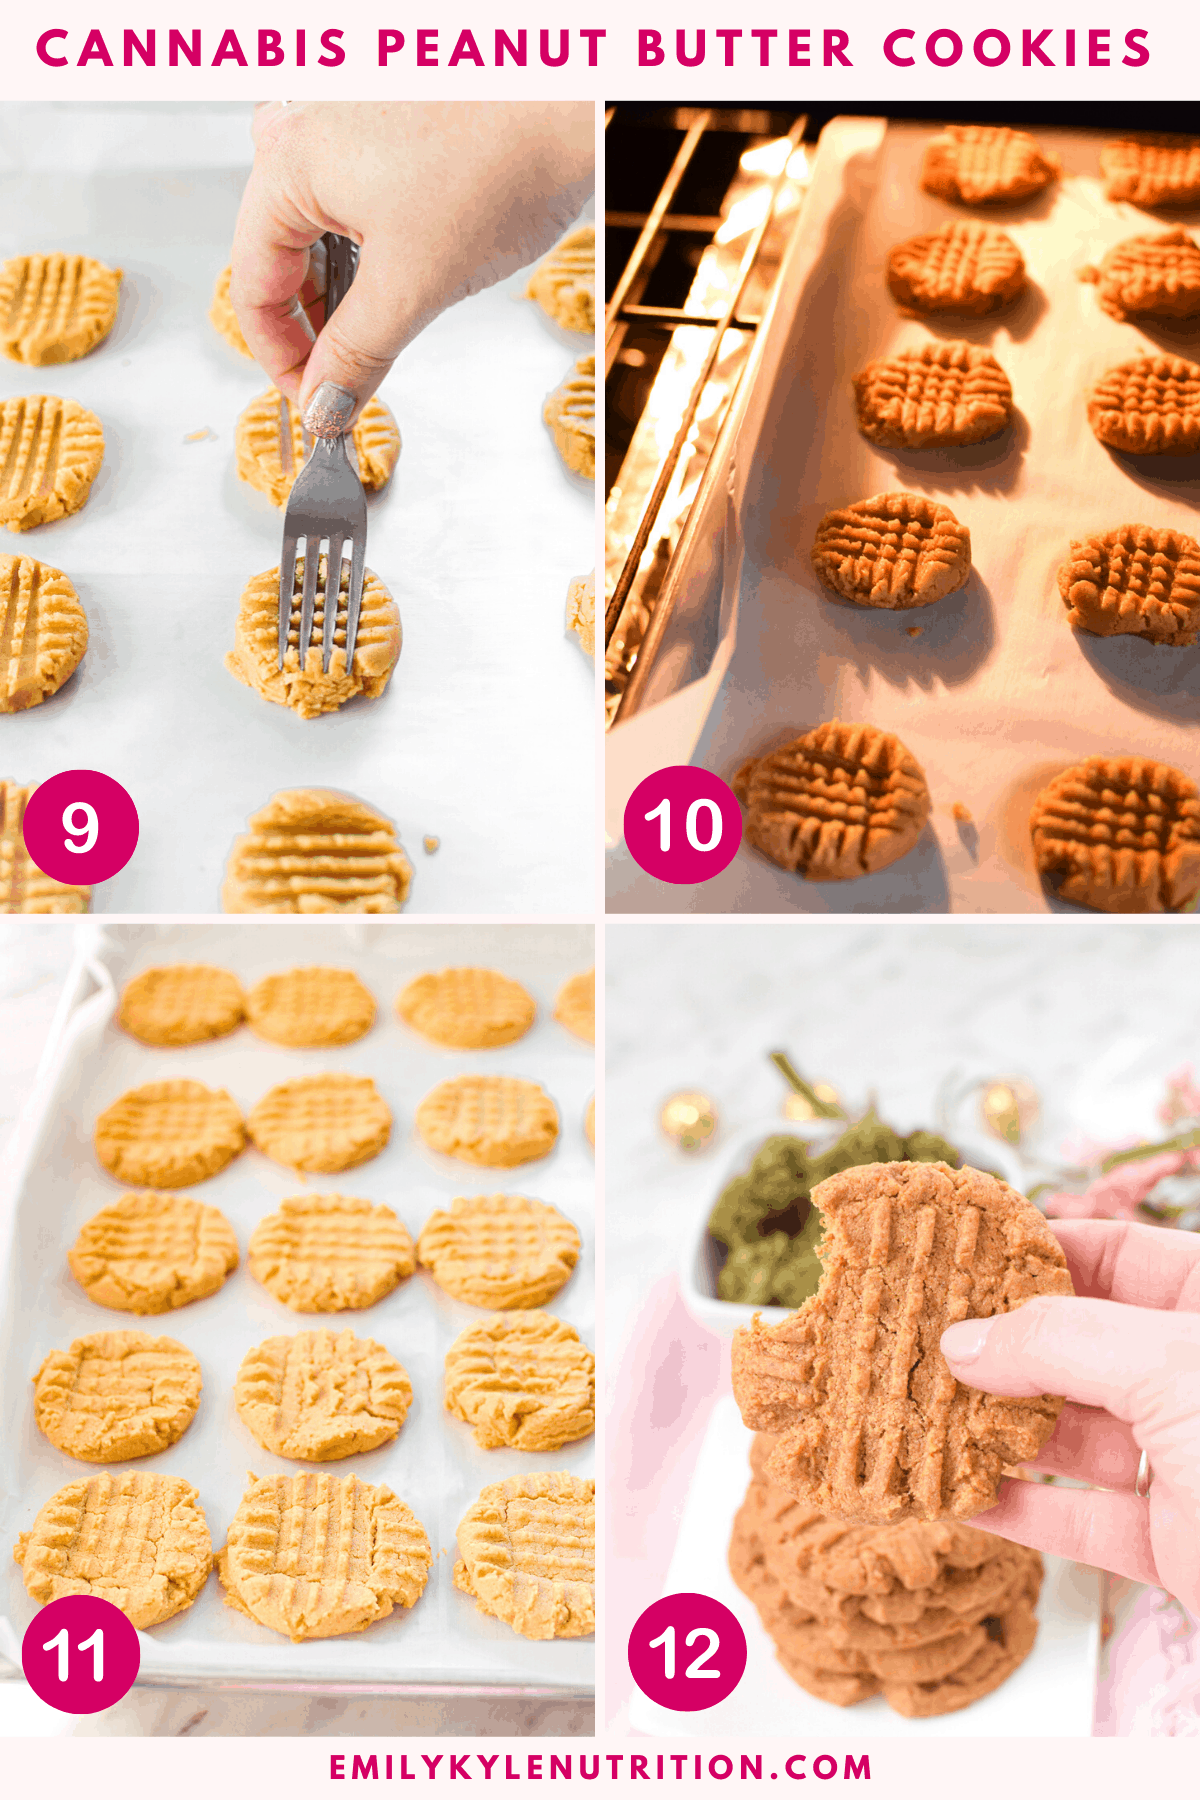 A 4 step image collage showing the following 9-12 steps in making peanut butter cookies including making a cross hatch pattern, baking in the oven, cooling and enjoying.